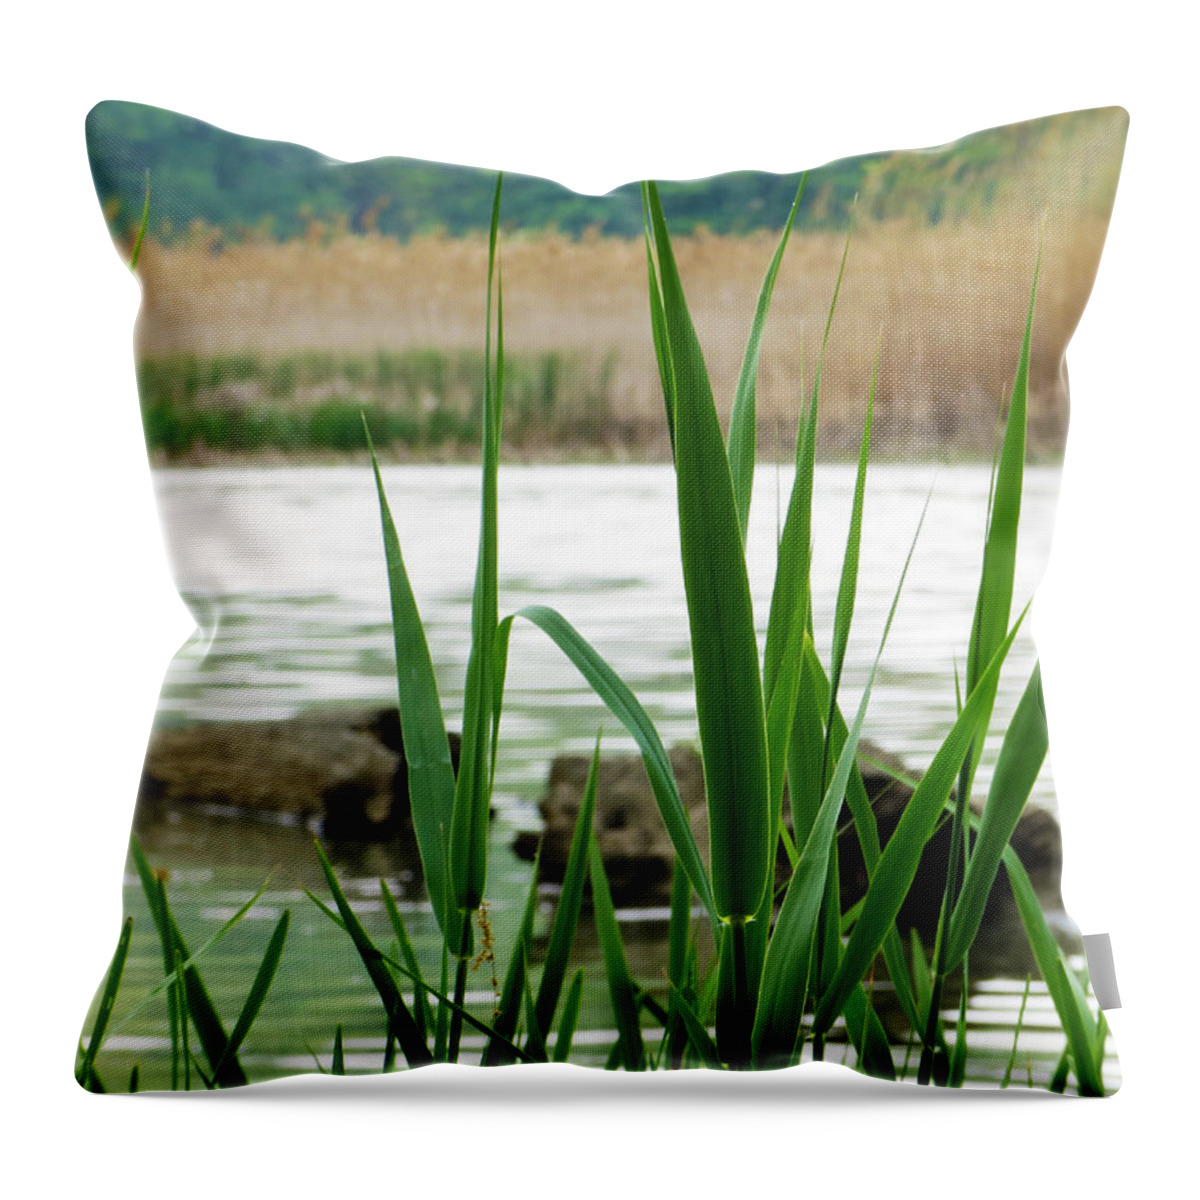 Wetland Throw Pillow featuring the photograph Wetland Grass 2 by Shawna Rowe